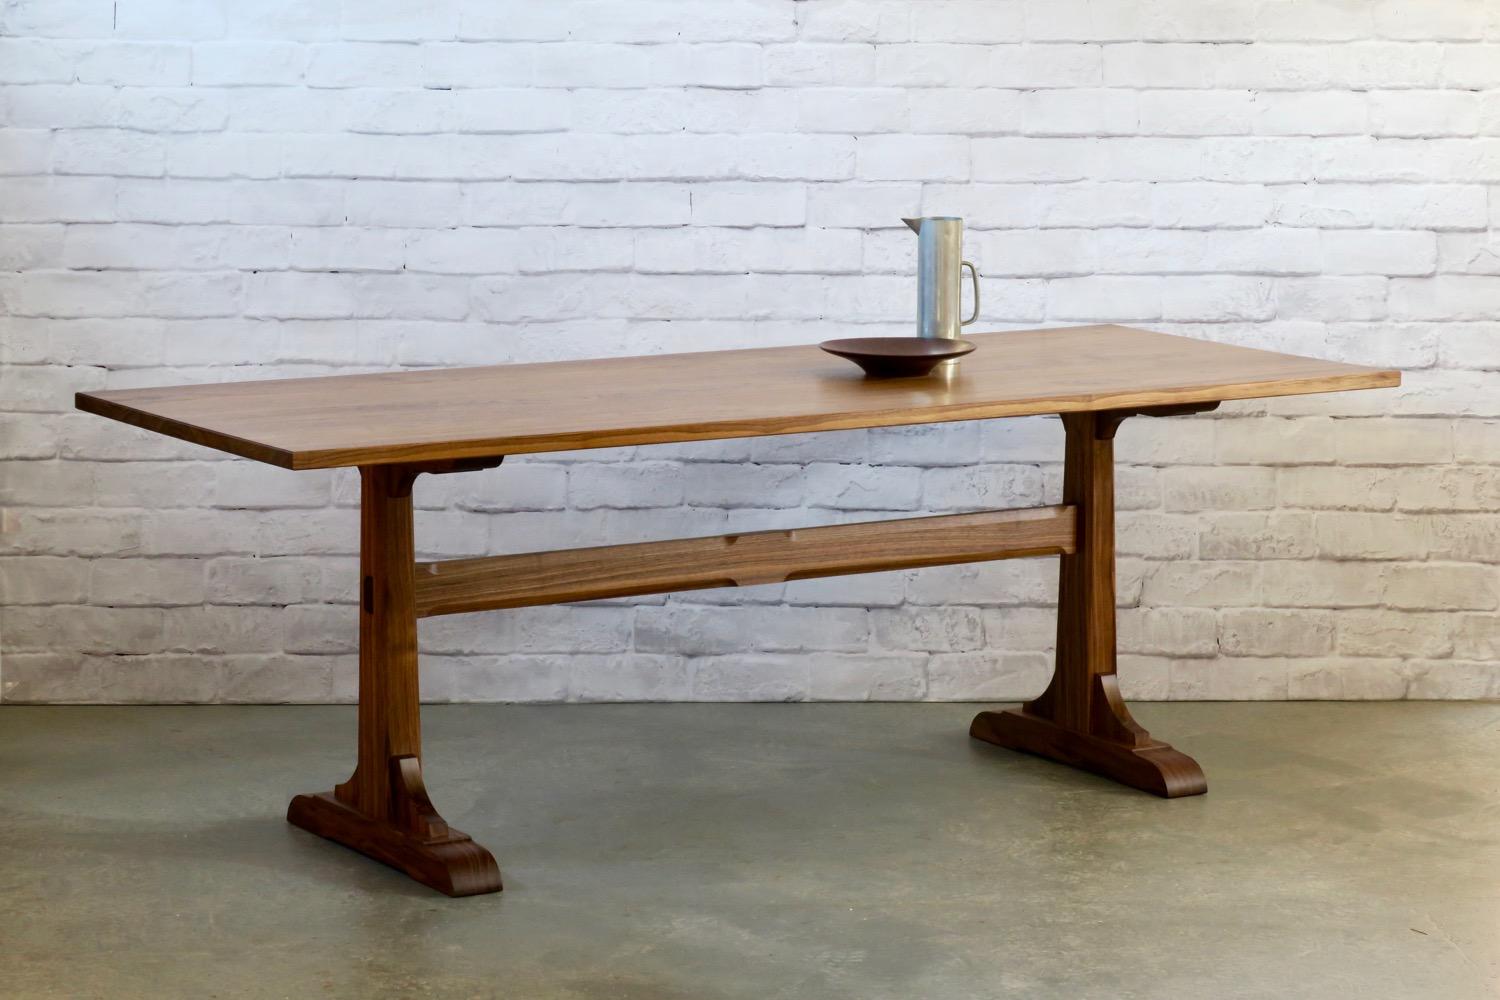 Carved Walnut Trestle Dining Table by Thomas Throop/Black Creek Designs - In Stock For Sale